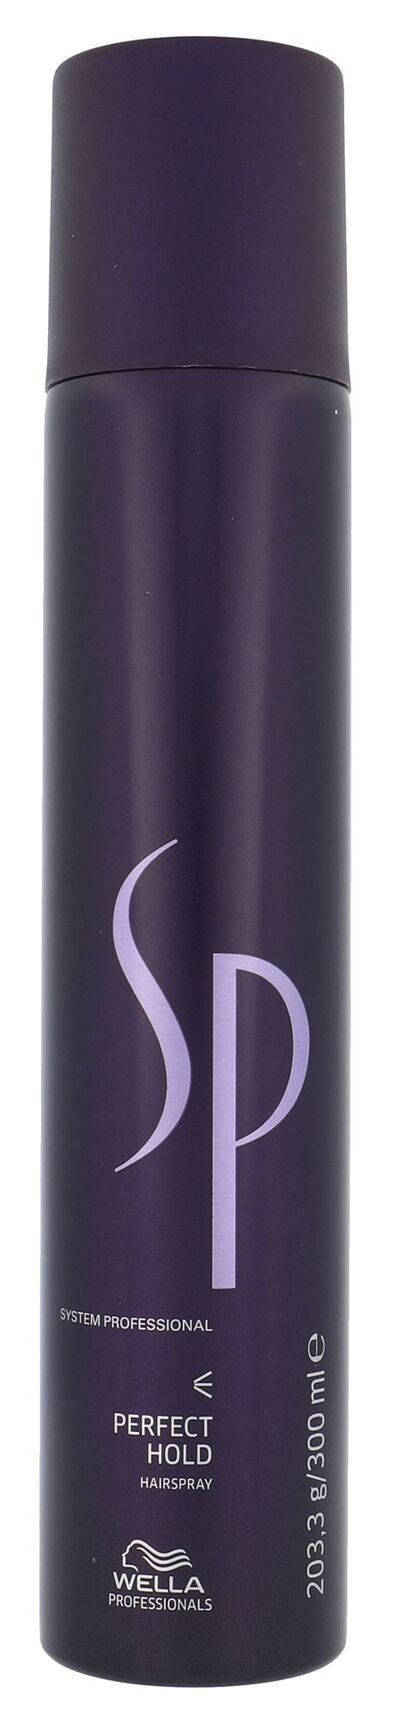 Wella Professionals SP Perfect Hold Cosmetic 300ml 